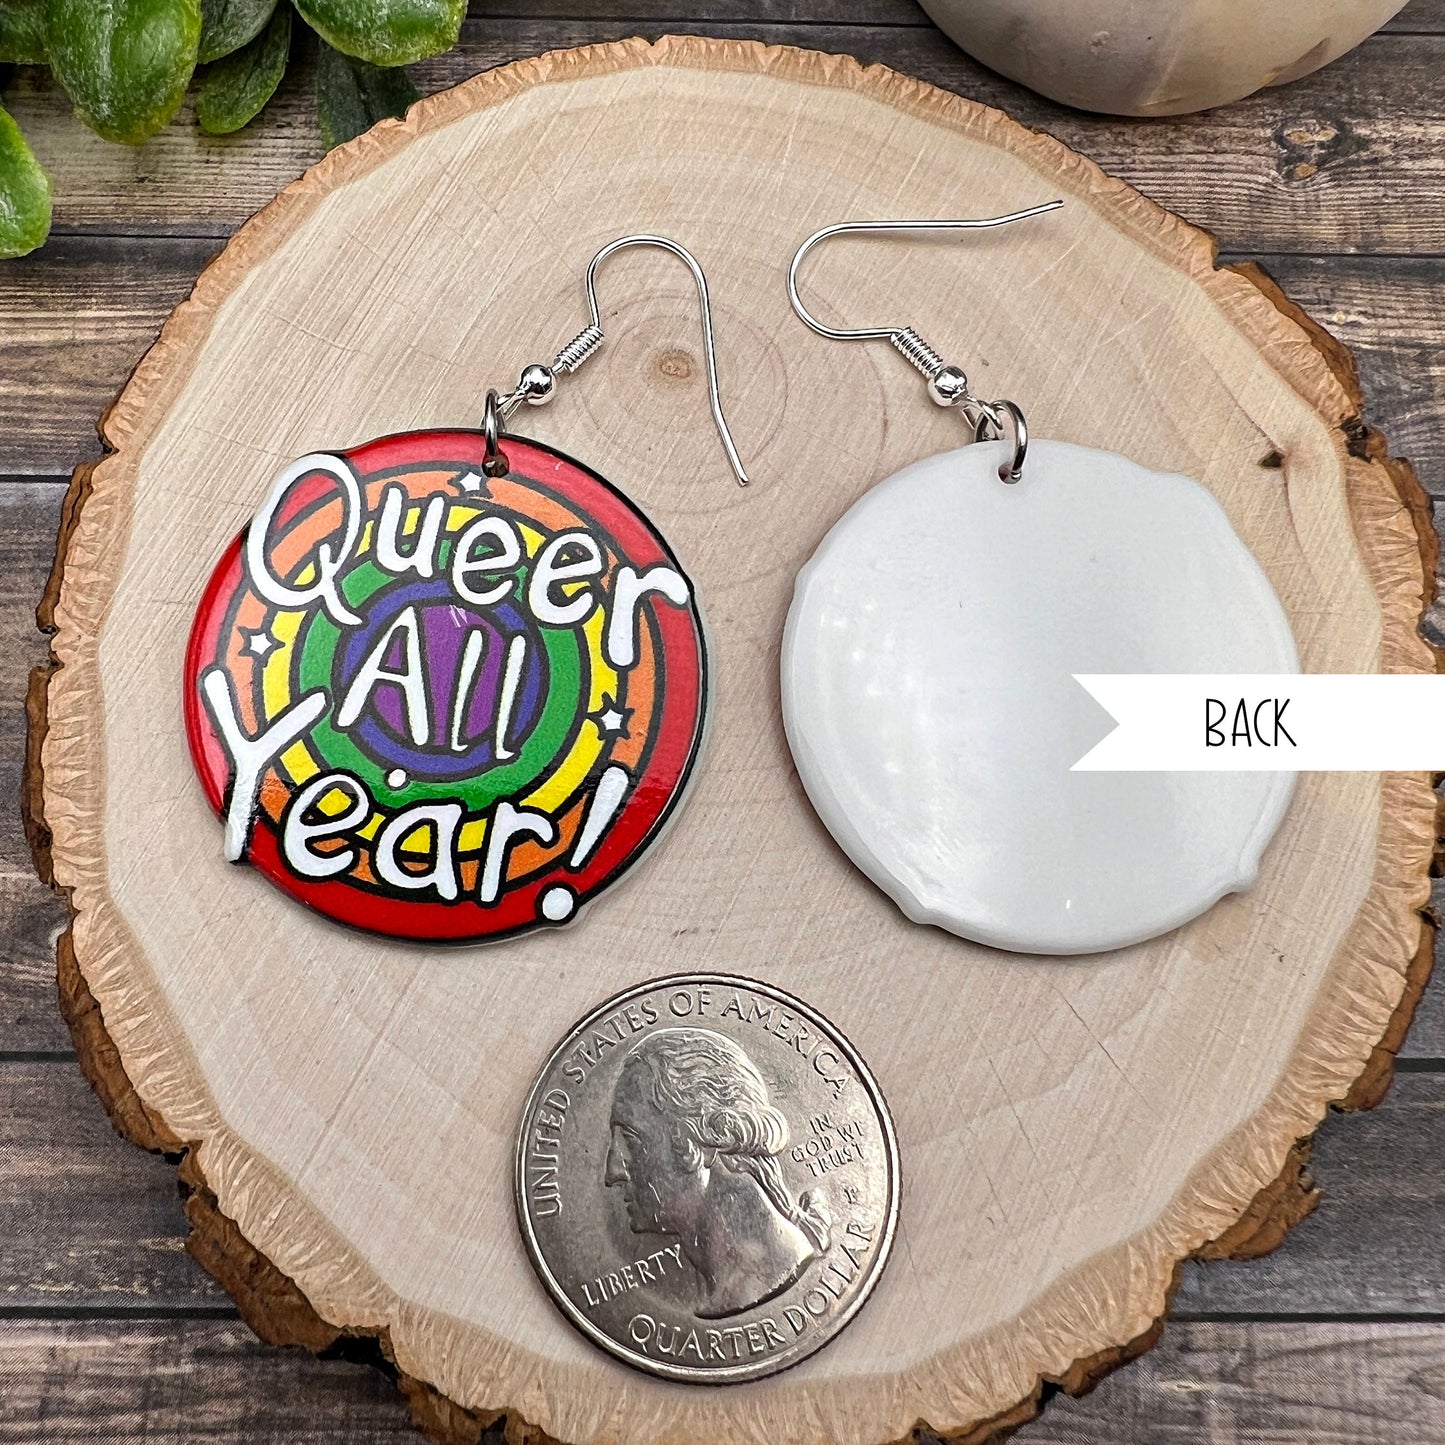 Queer All Year Lightweight Acrylic Pride Month LGBTQ+ Rainbow  Earrings, Hypoallergenic Gift